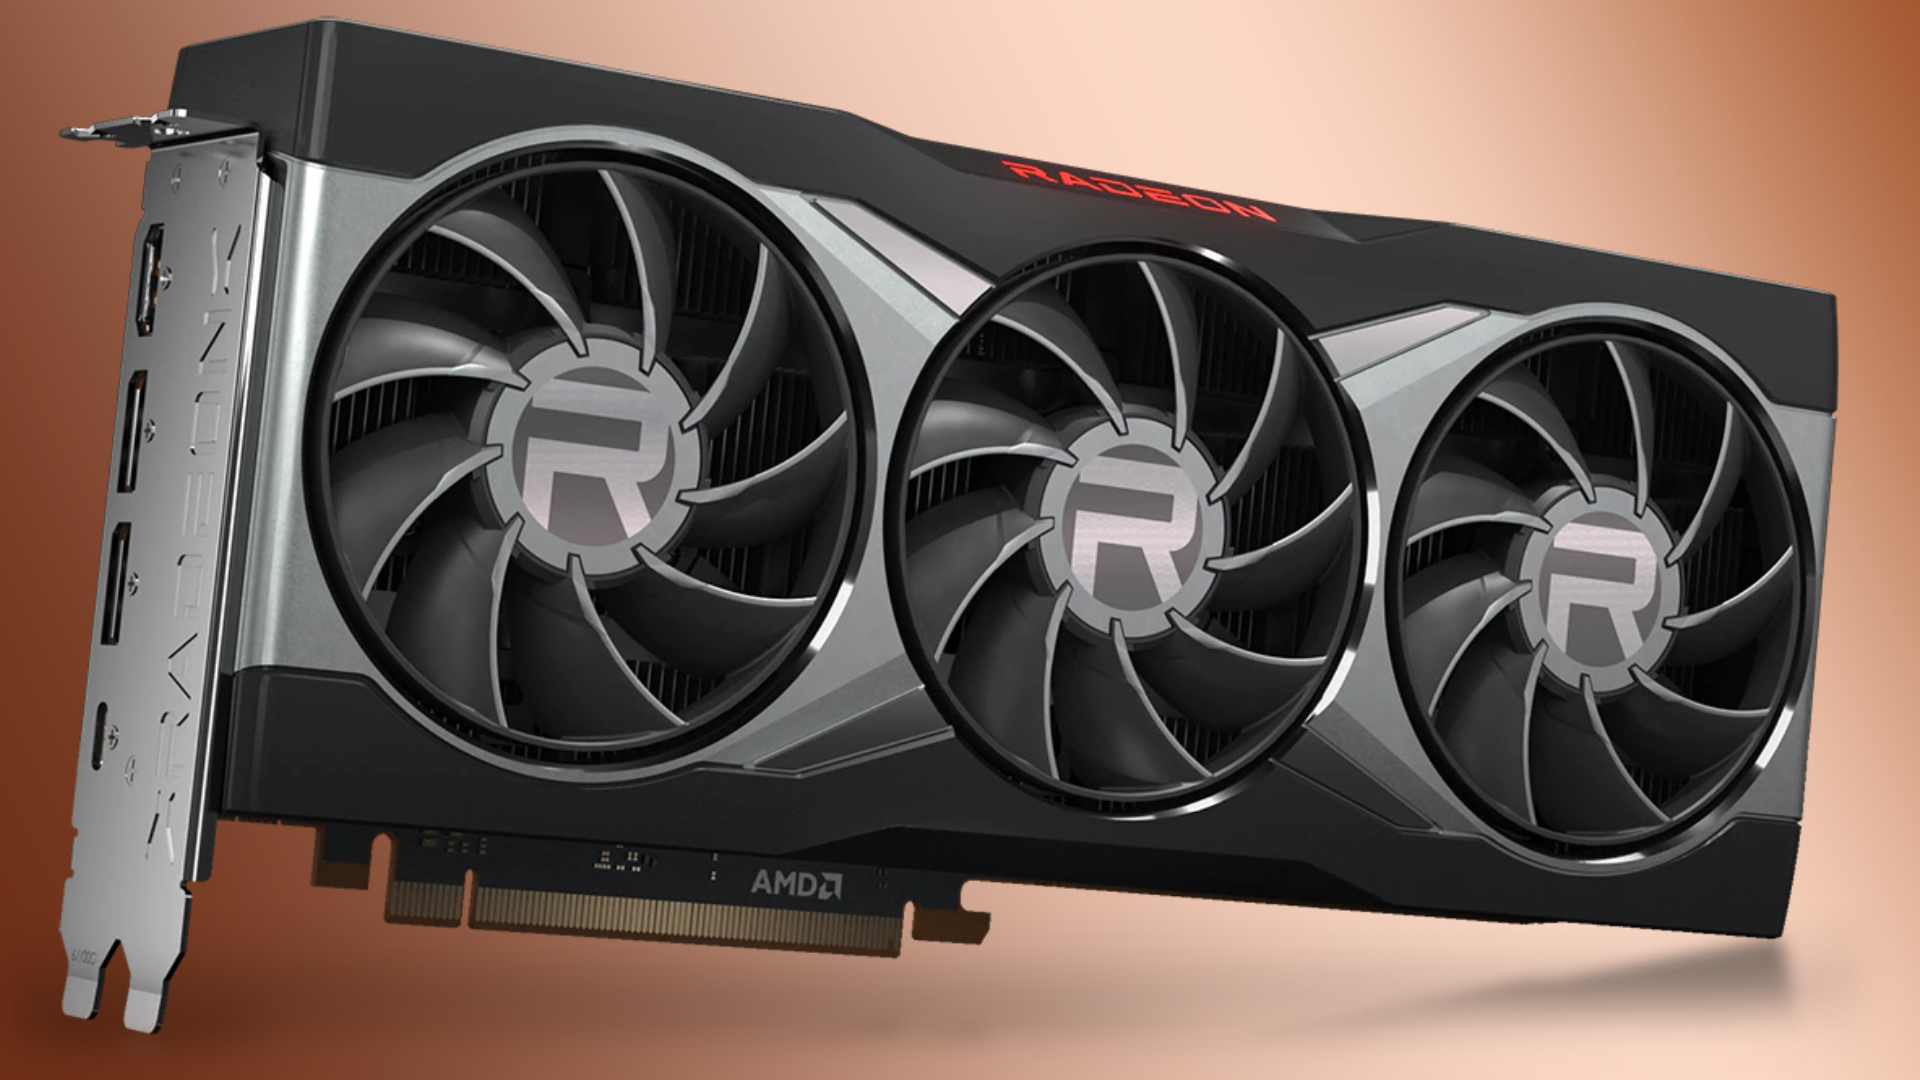 AMD Radeon RX 7900 XT – release date, price, specs, and benchmarks